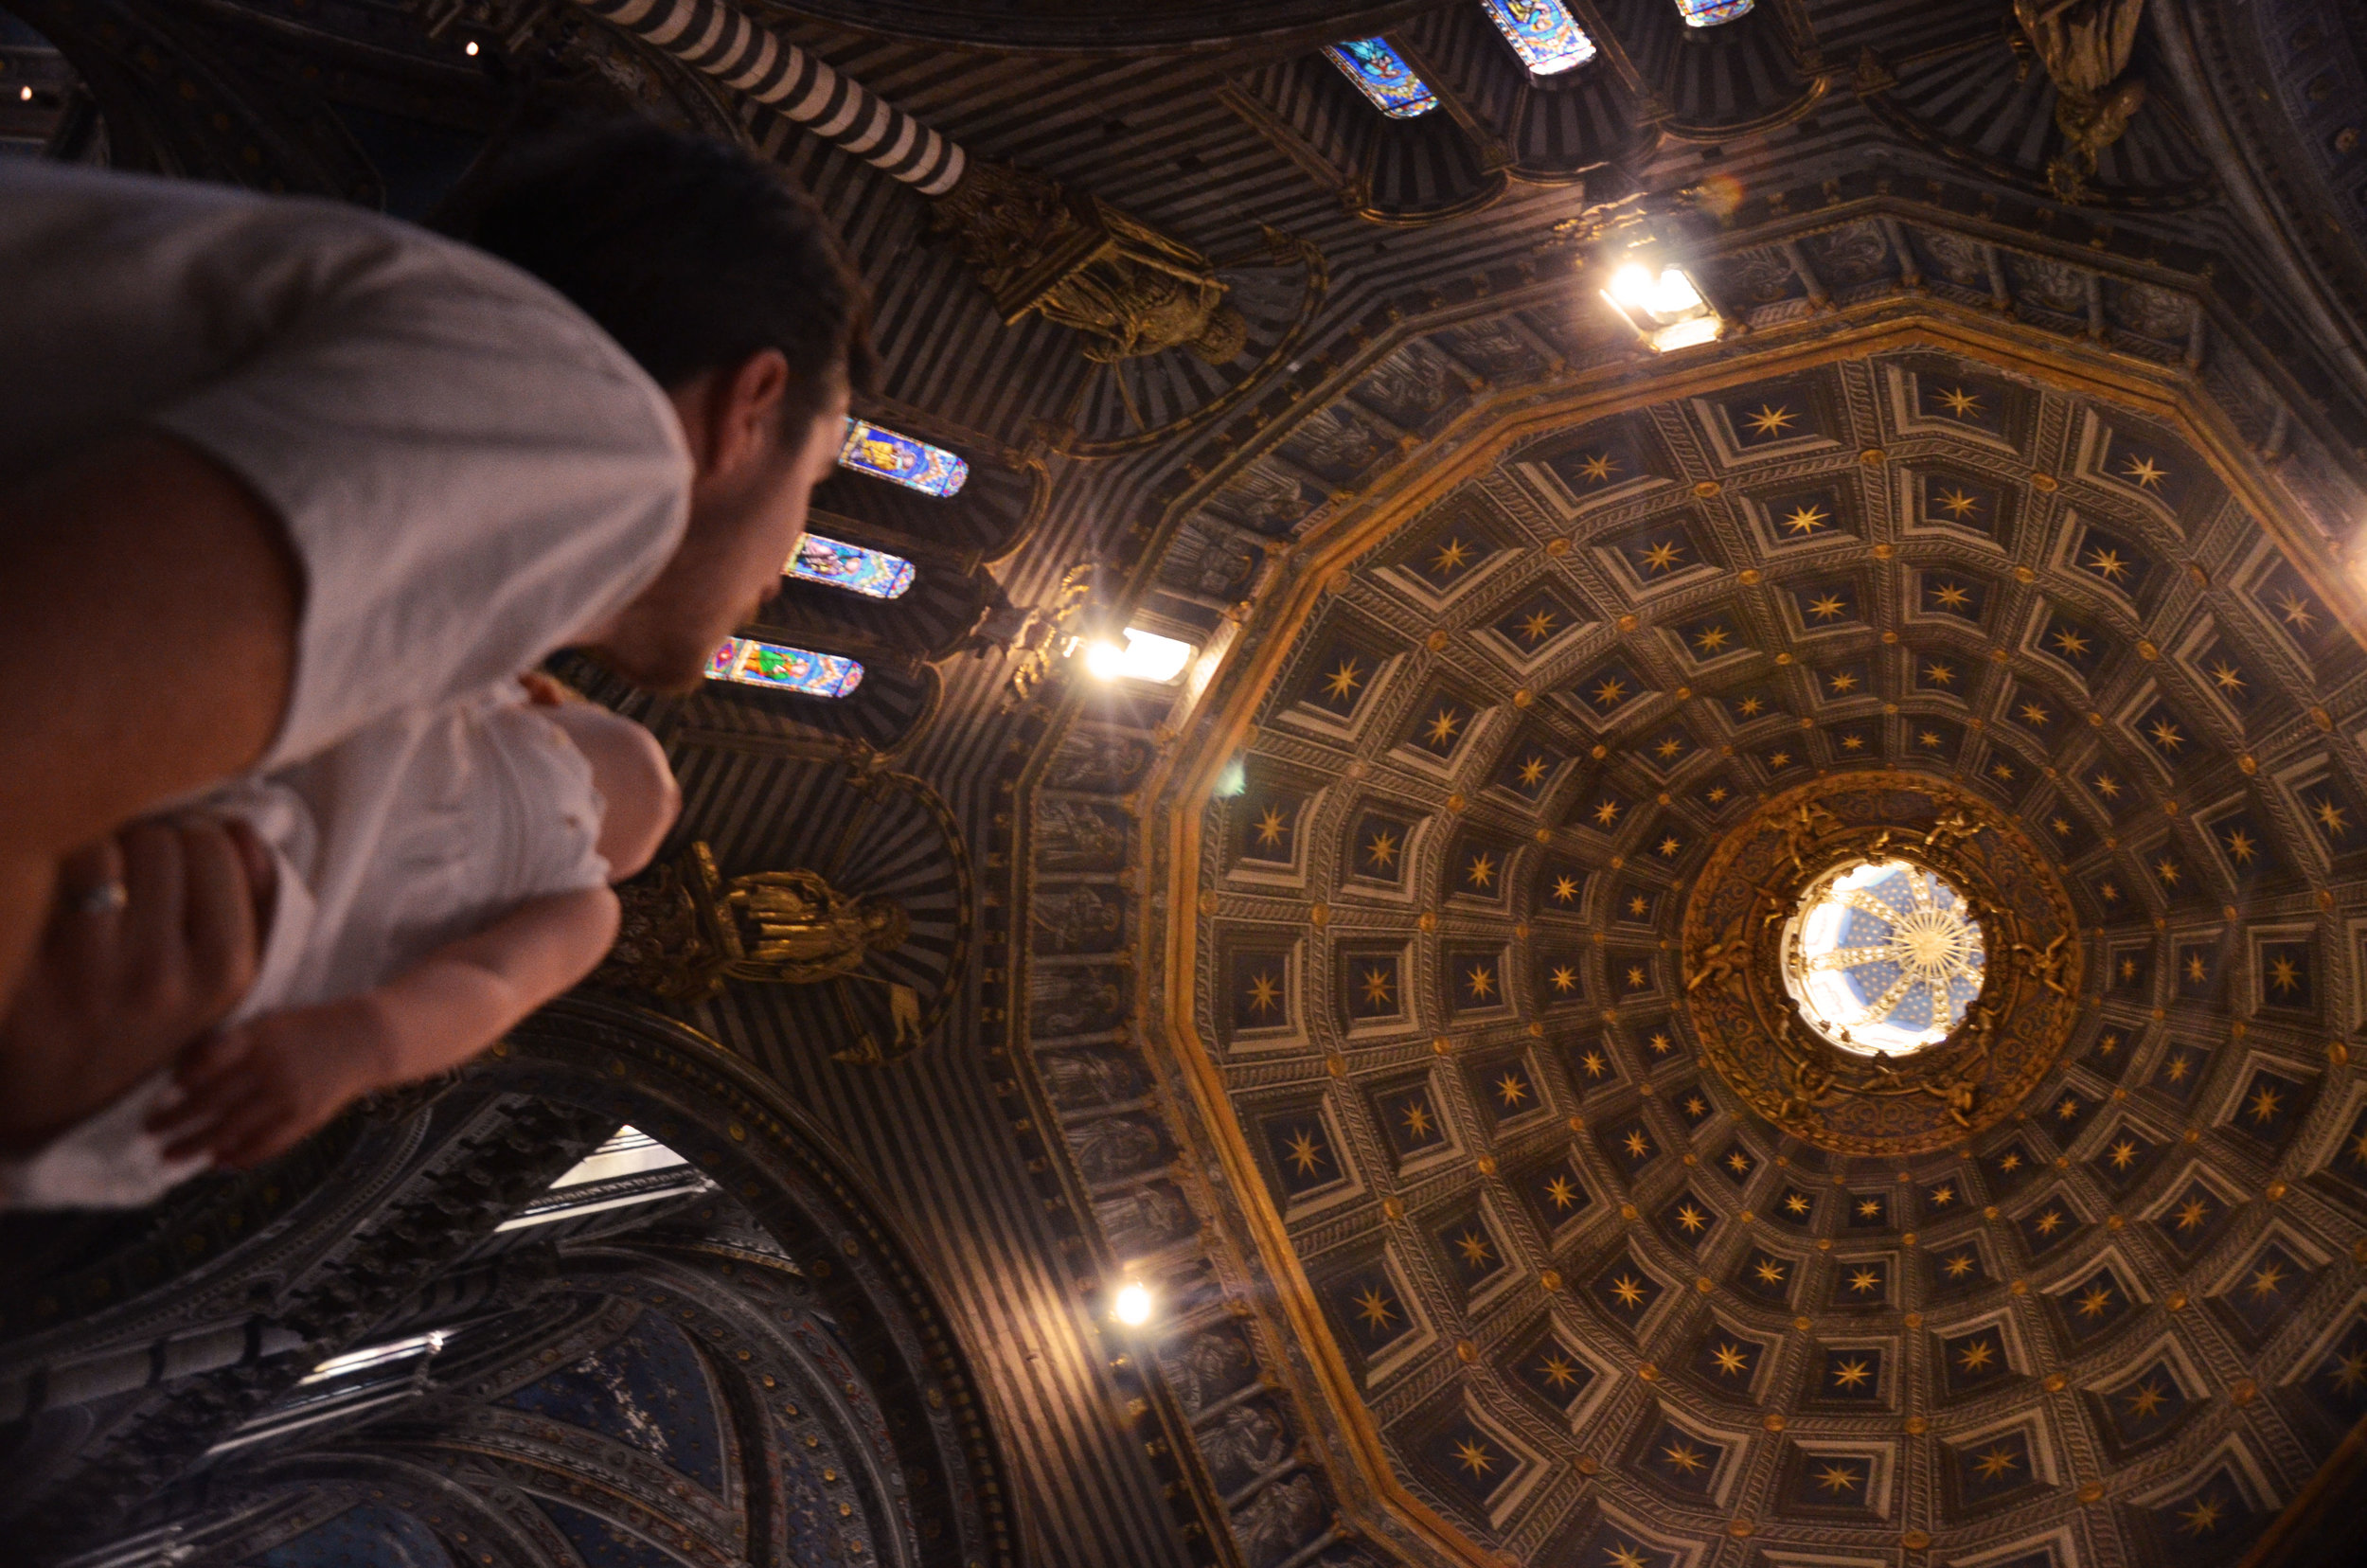 Inside Siena's domed cathedral